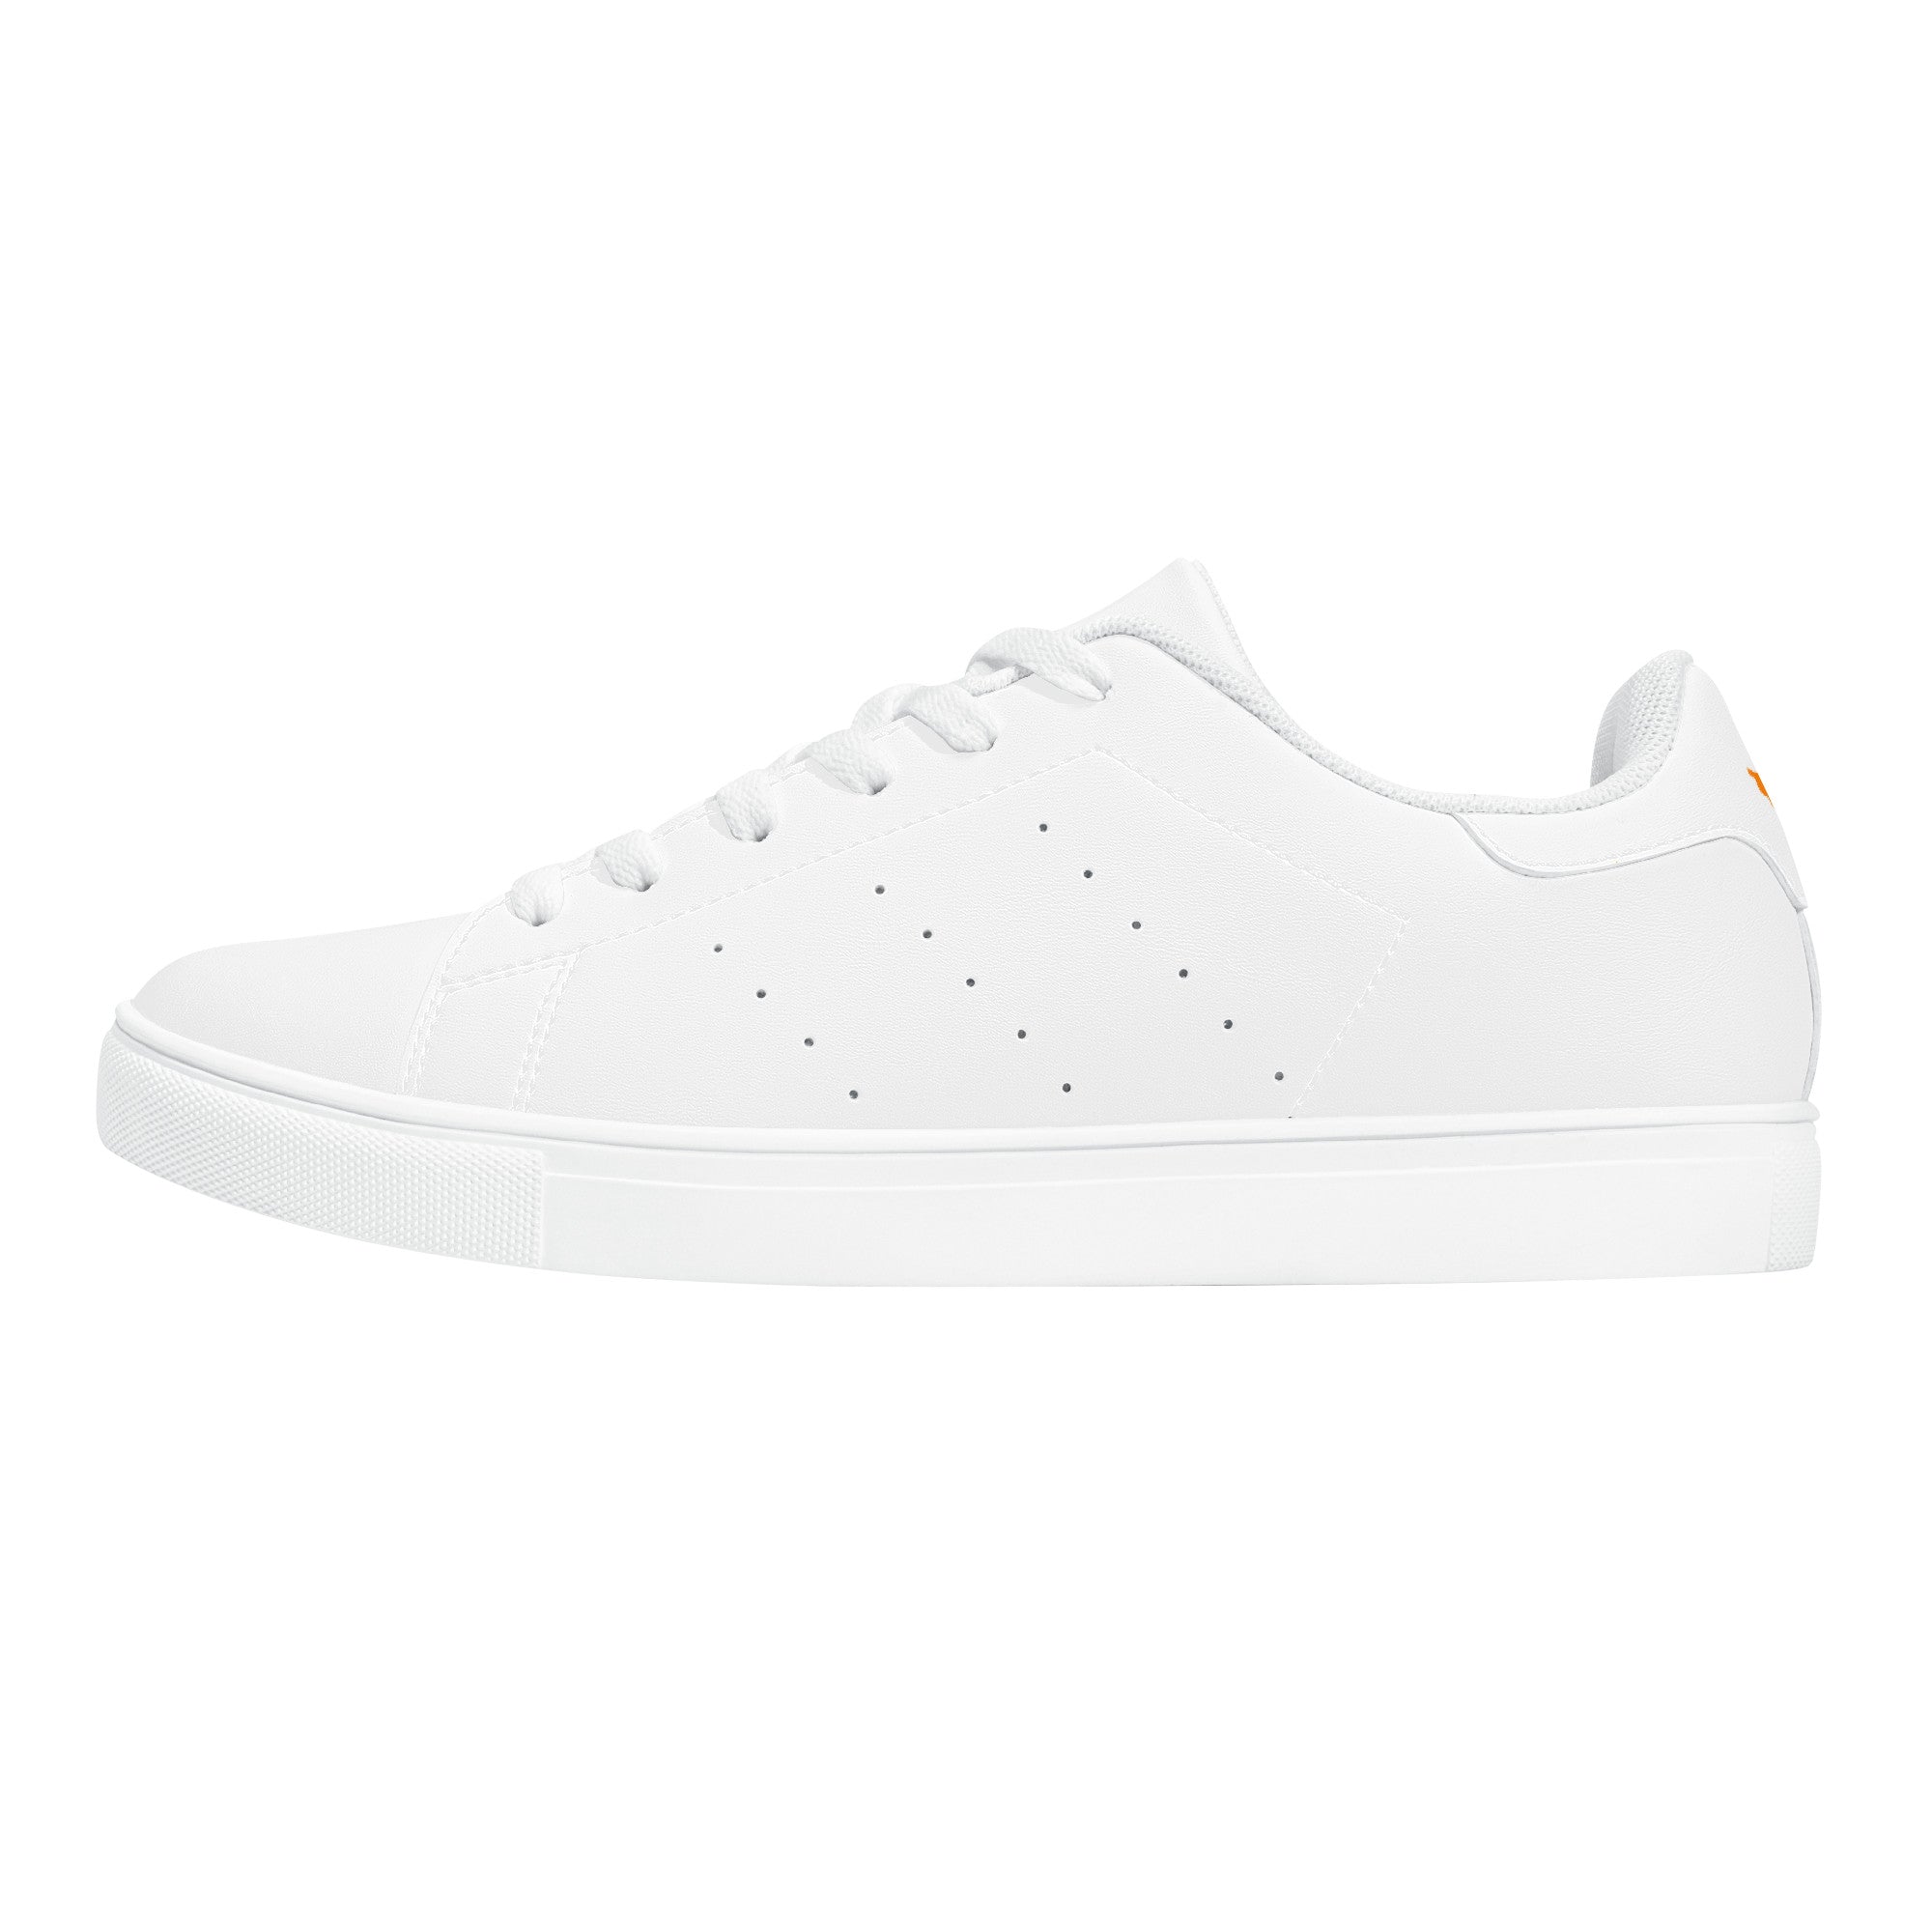 Wedding Cypriot Flag - Low-Top Synthetic Leather Sneakers - White - Shoe Zero